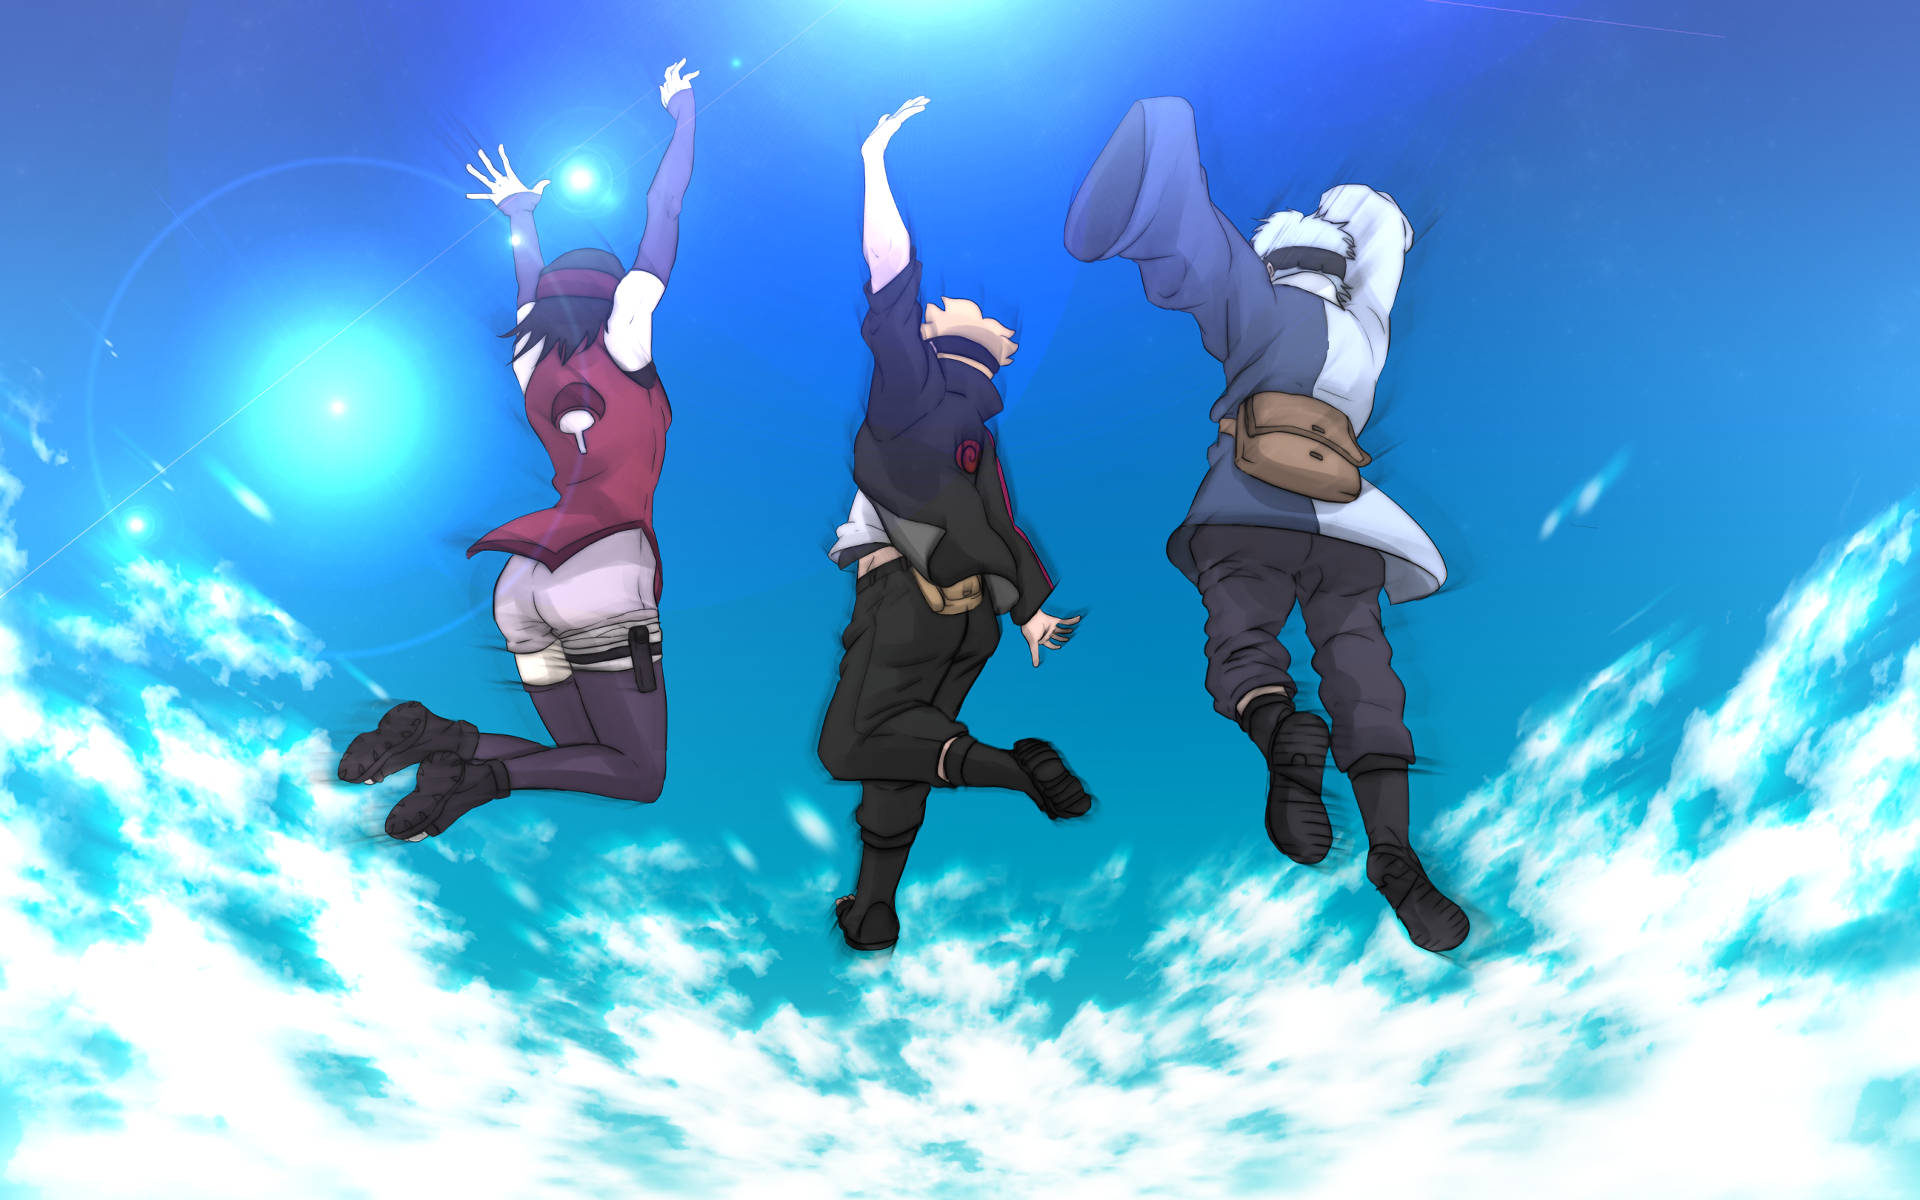 Team 7 In Action, Jumping Towards The Sky In Unison Background